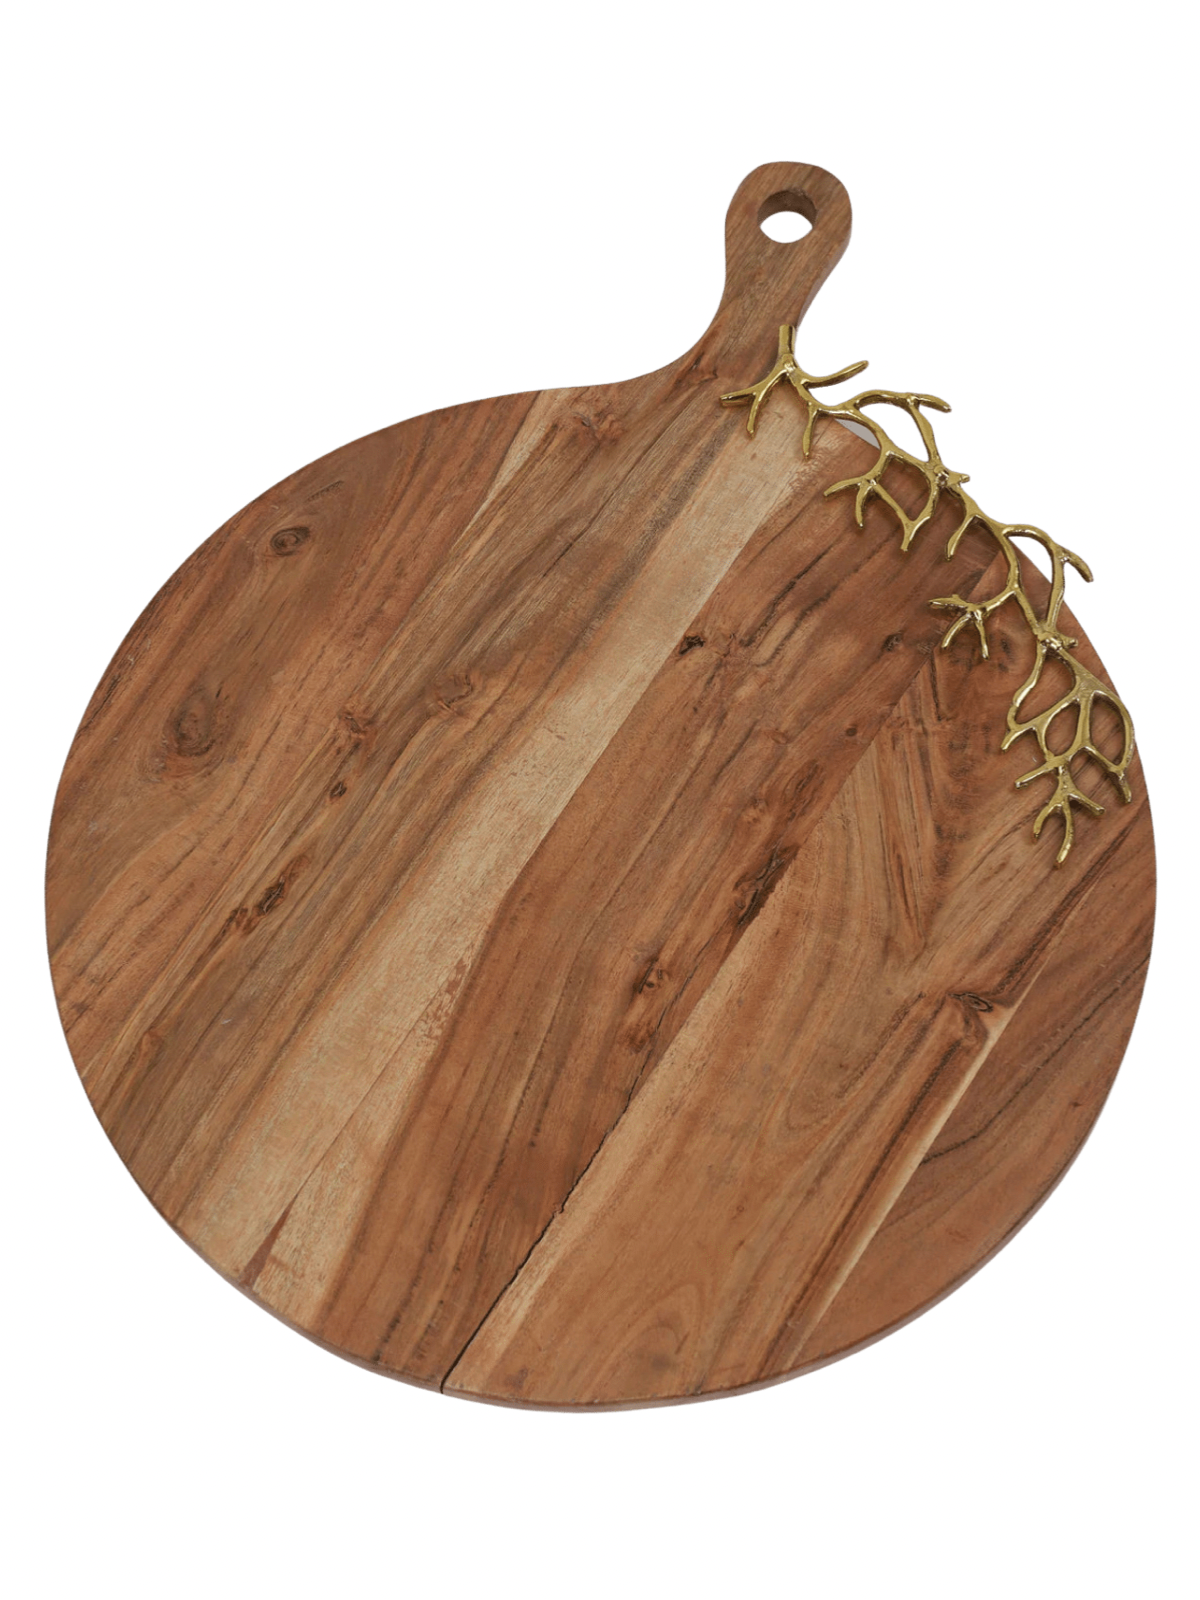 Round Wood Charcuterie Board with Luxury Gold Coral Design and Handle sold by KYA Home Decor.